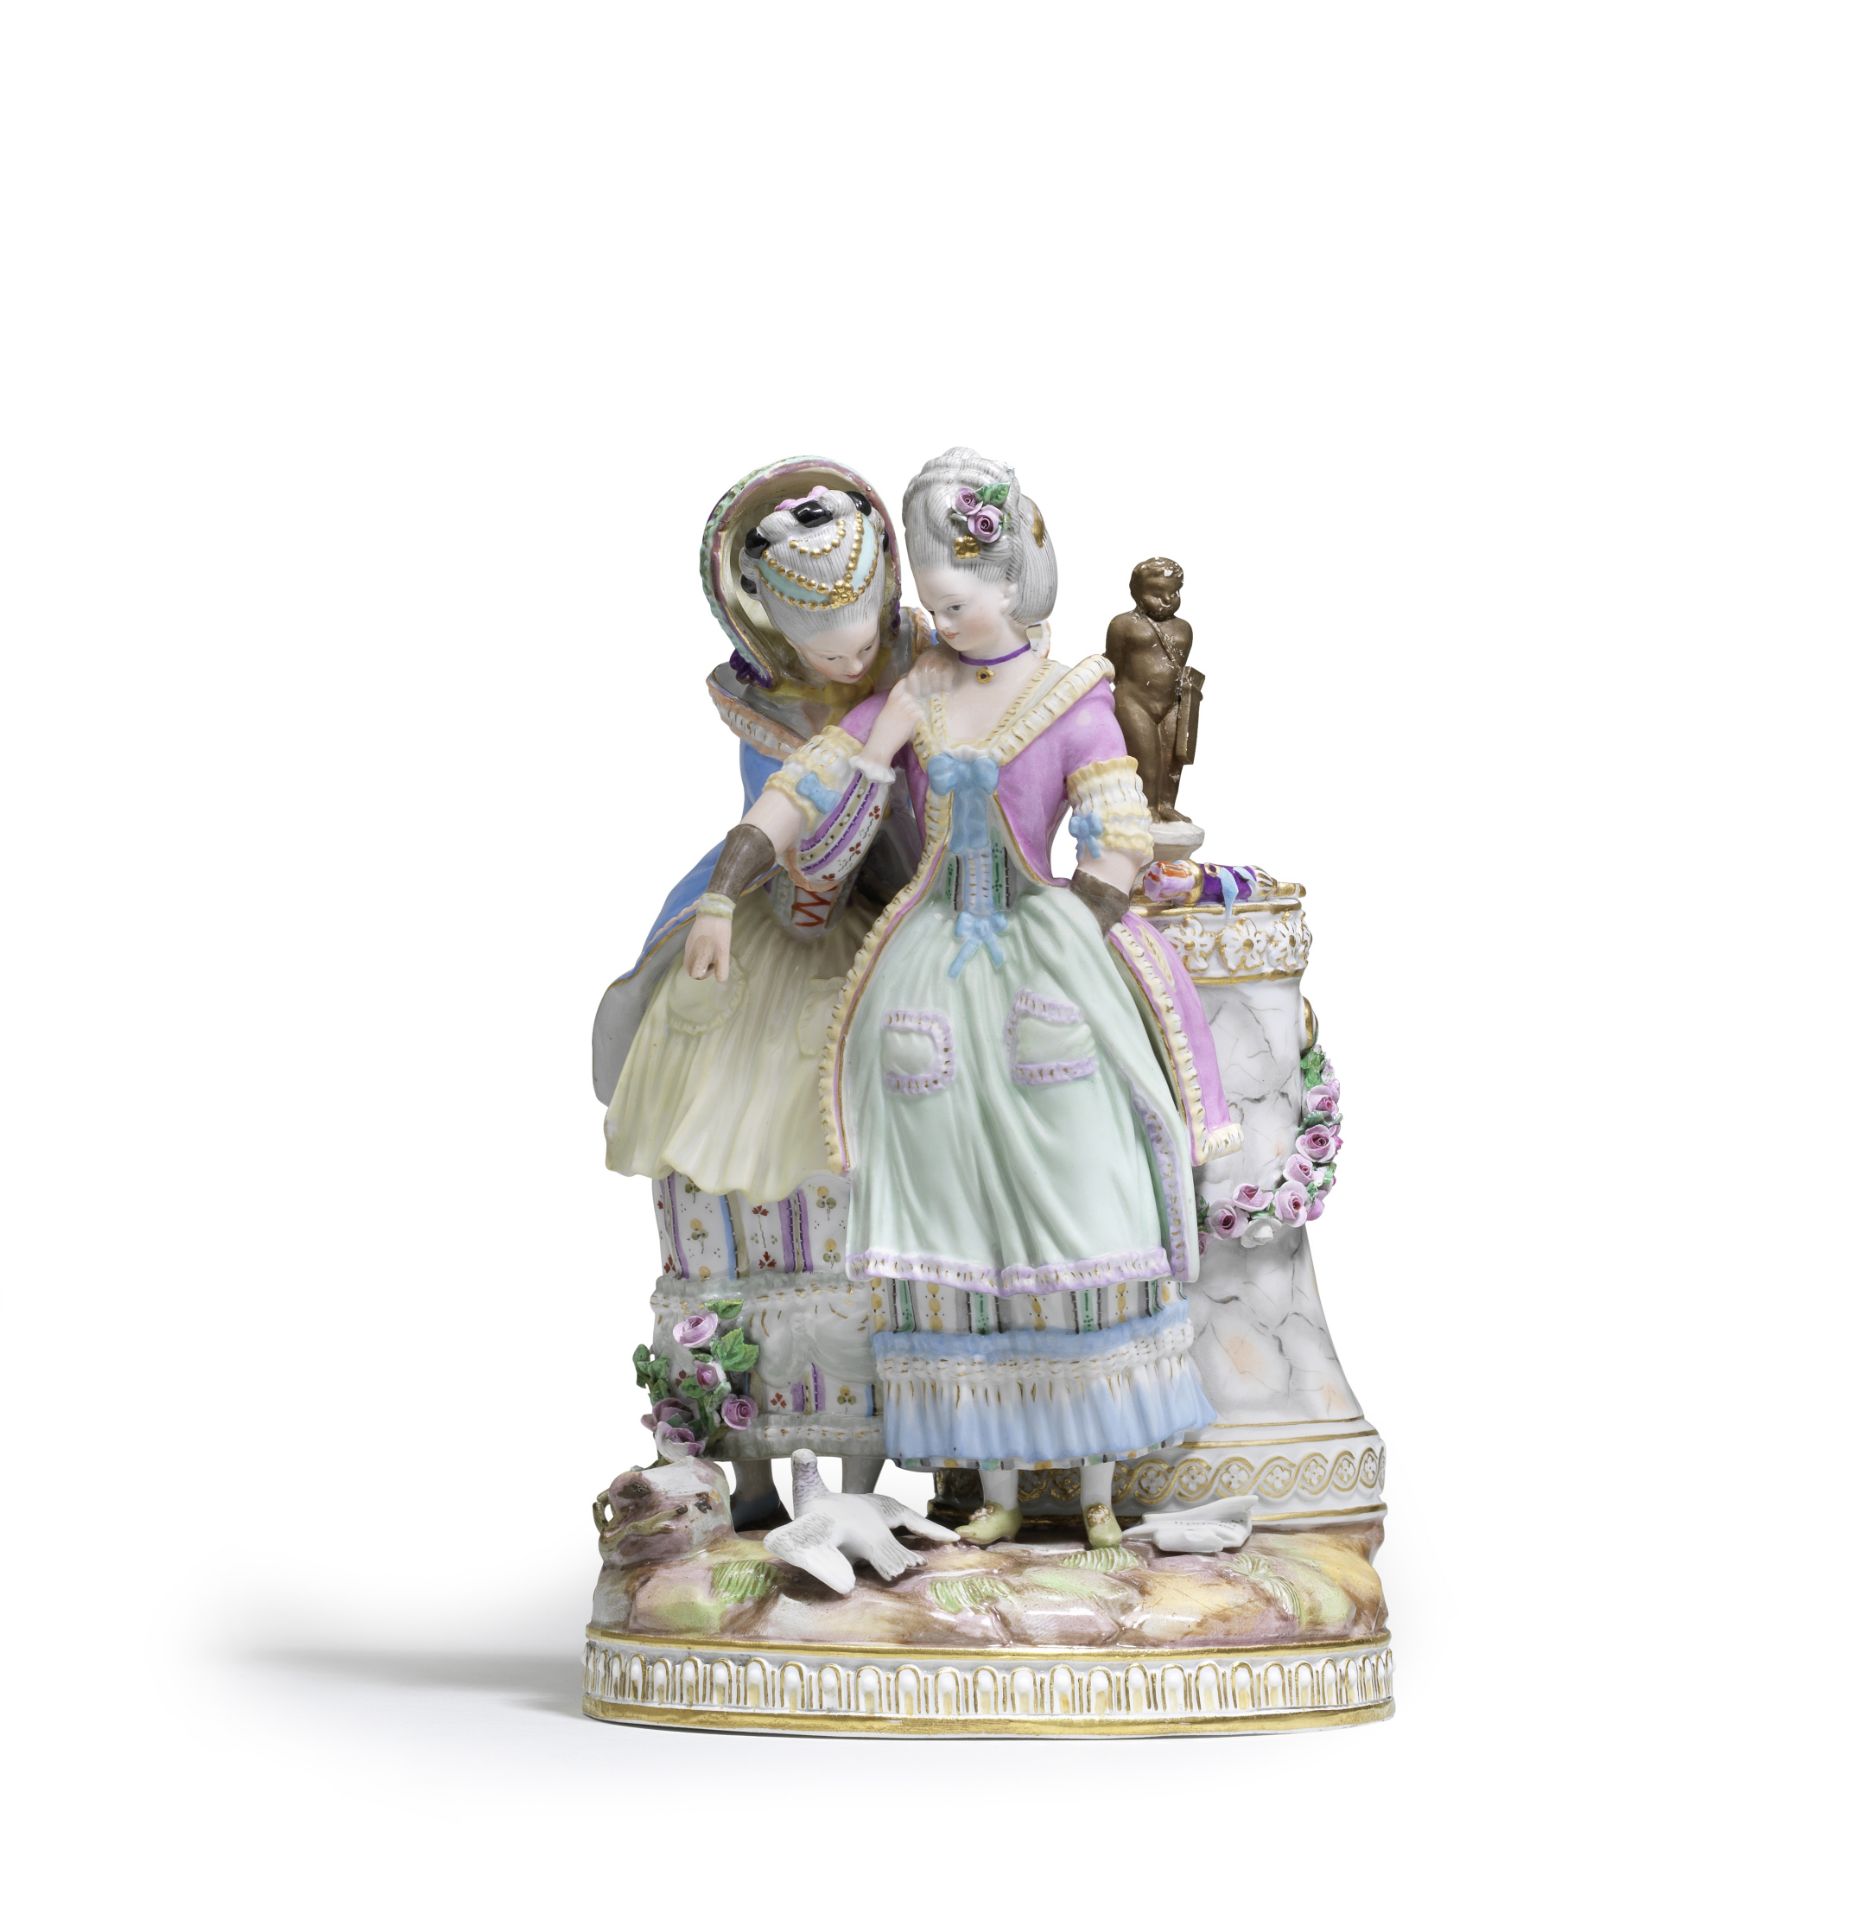 A Meissen group of two elegant ladies, known as 'The Secret' or 'The Young Bride', late 19th century